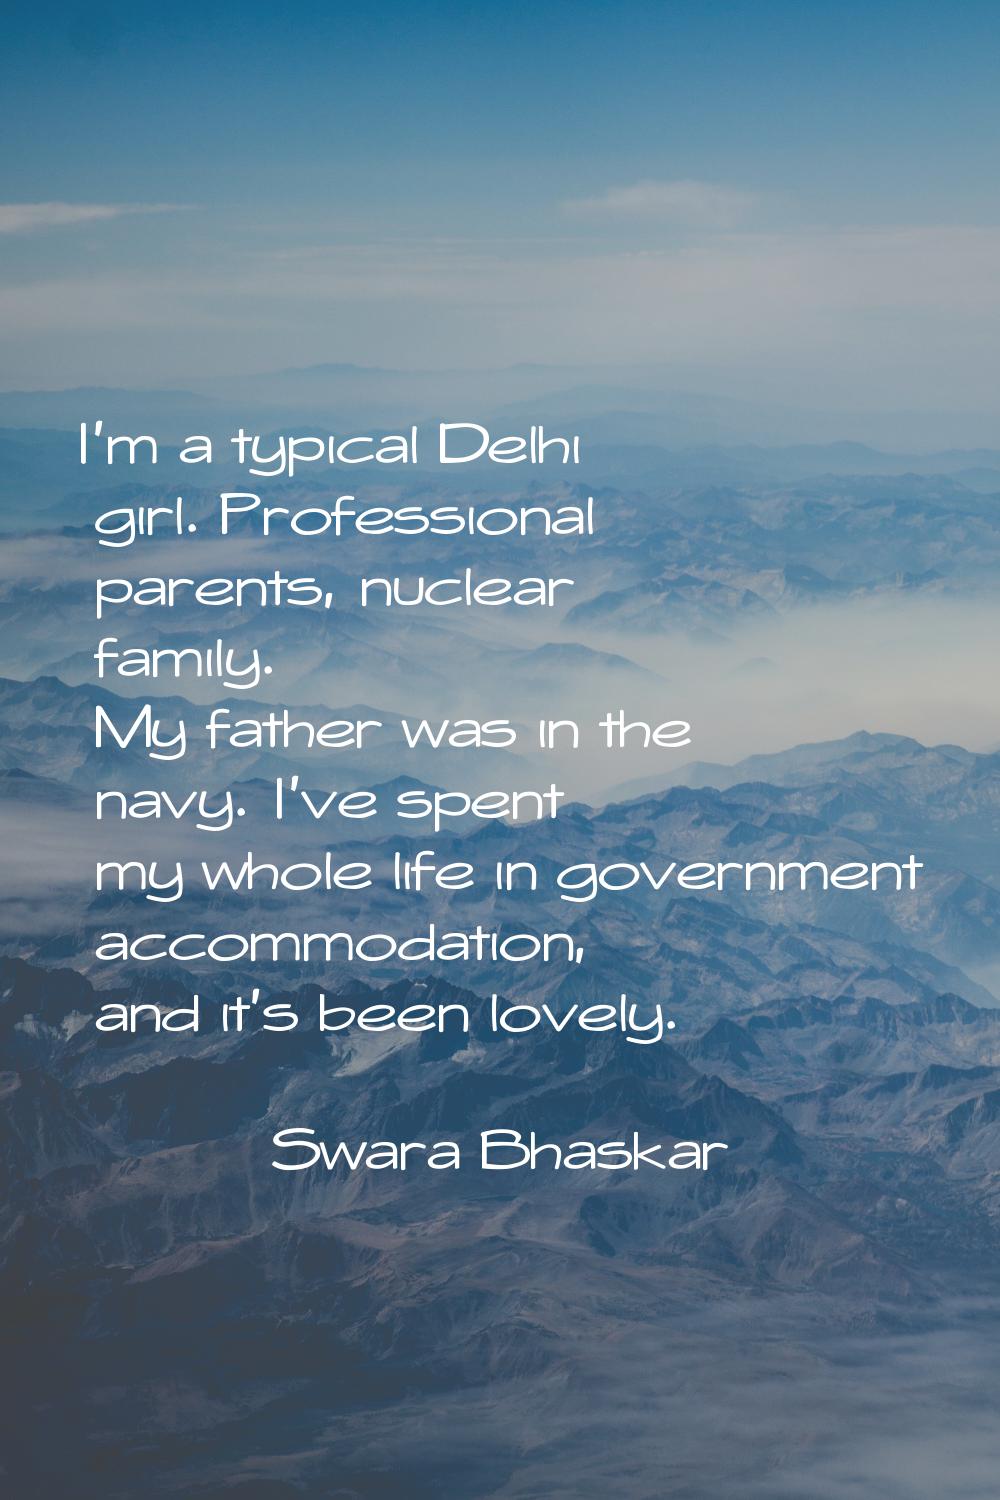 I'm a typical Delhi girl. Professional parents, nuclear family. My father was in the navy. I've spe